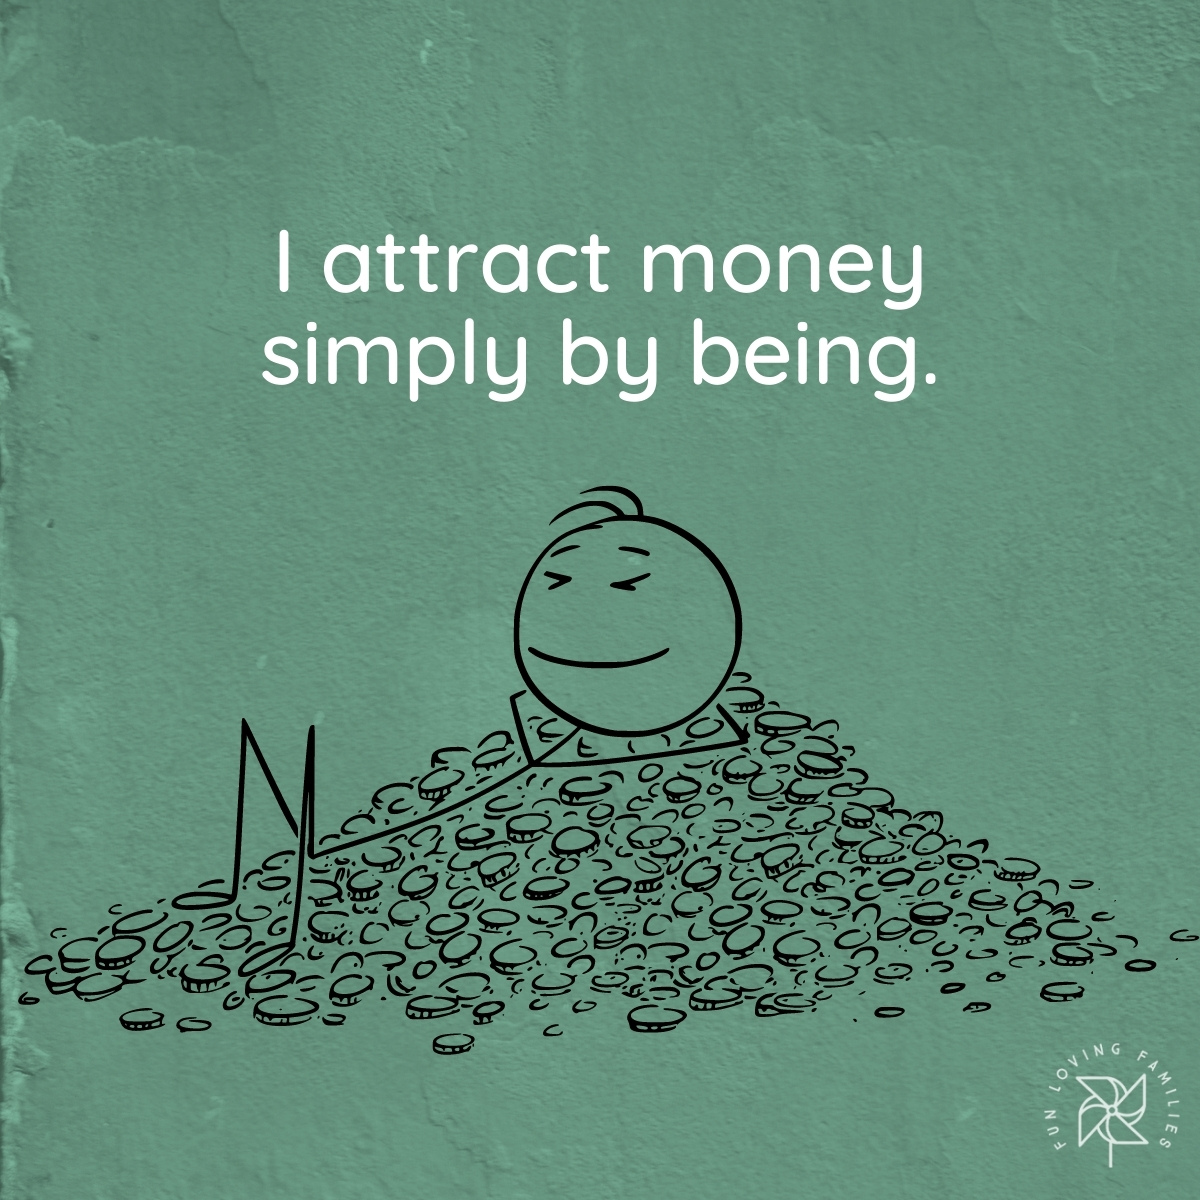 I attract money simply by being affirmation